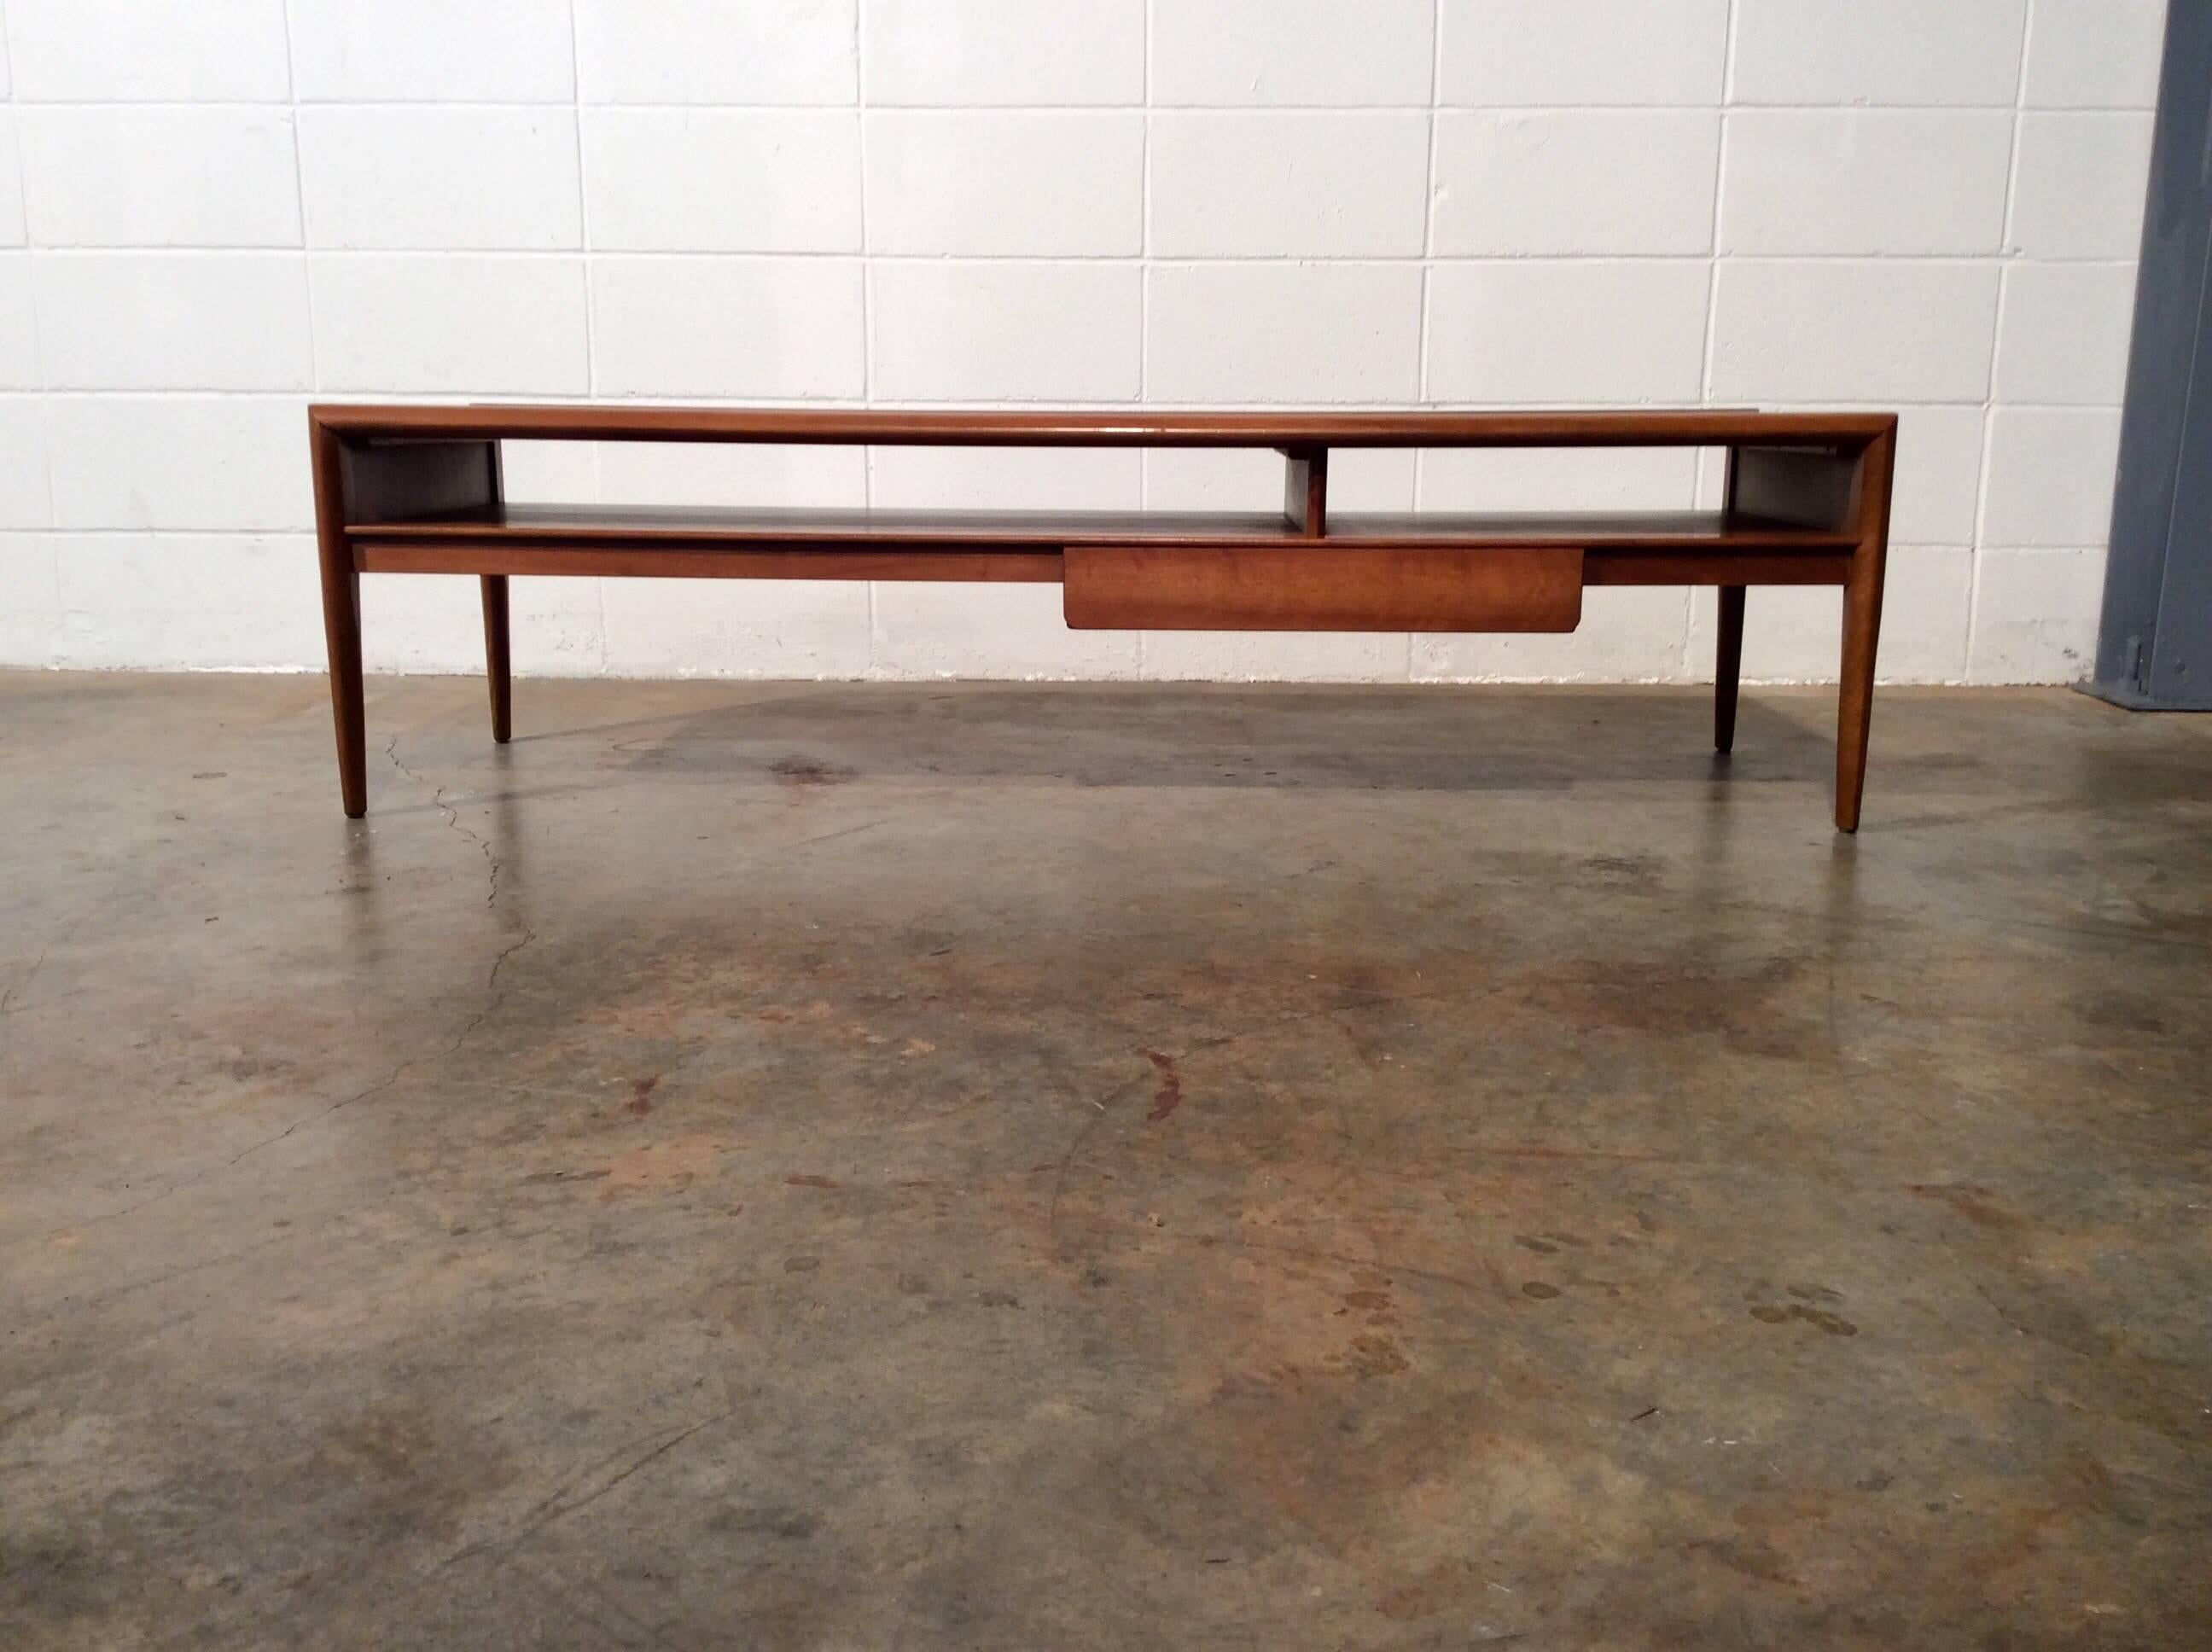 Mid-Century Modern Drexel parallel walnut coffee table by Barney Flagg.
Rarely seen long Walnut coffee table with a drawer and slotted storage. Table has had a glass protecting the top it's entire life. No defects that would detract from value or